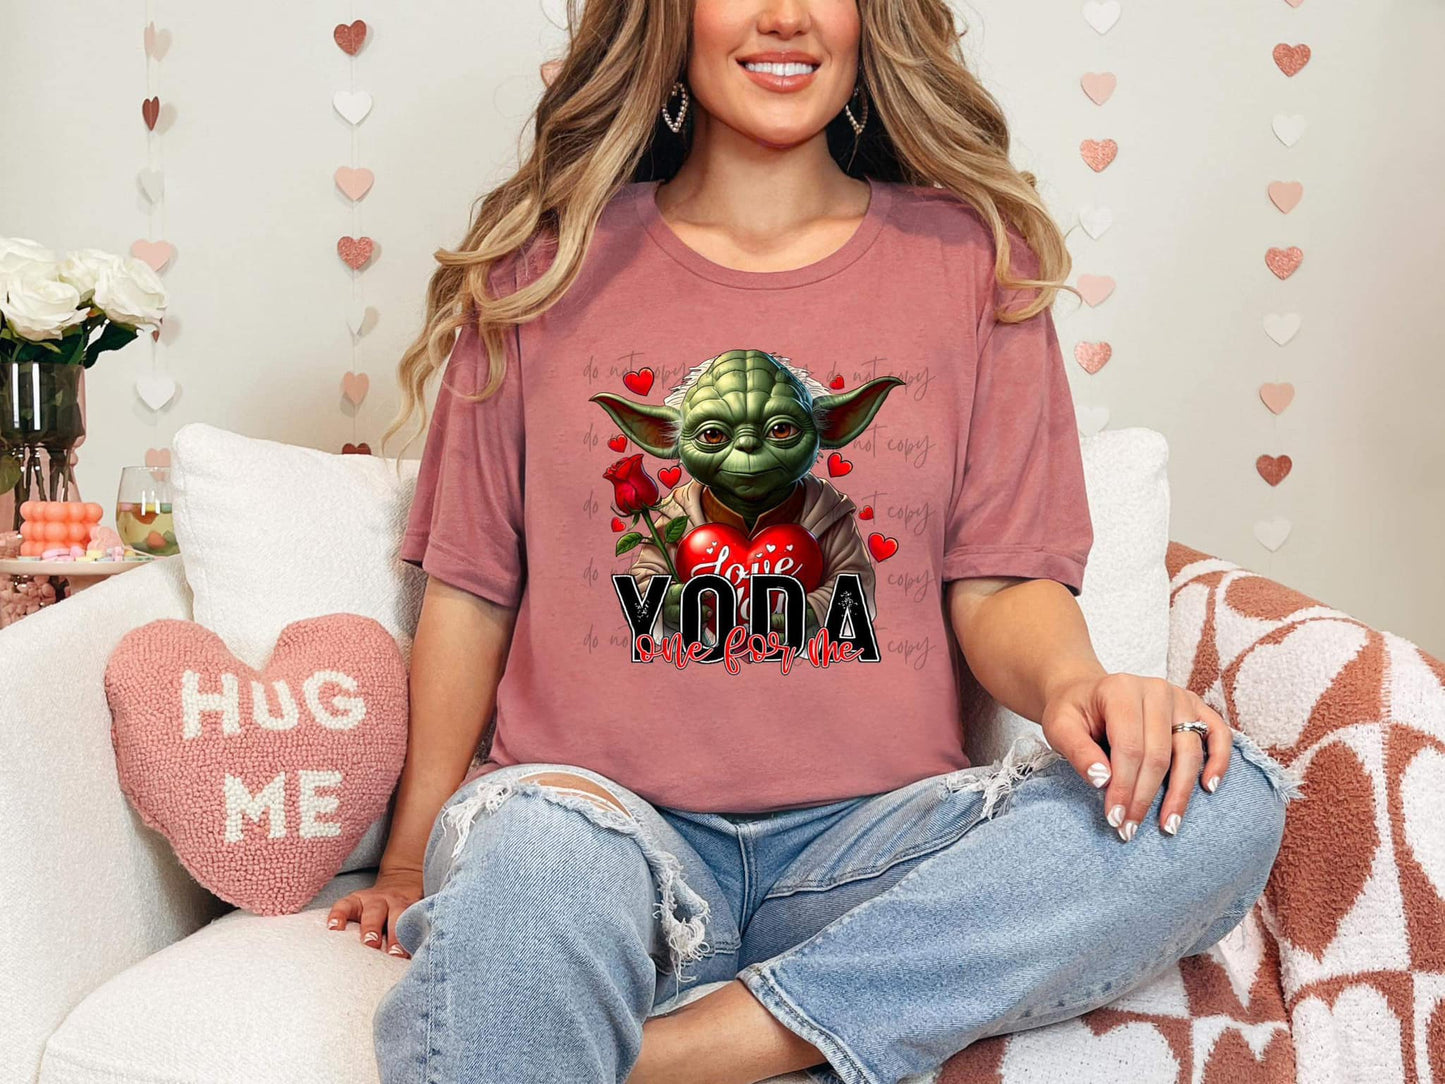 Yoda the One for Me